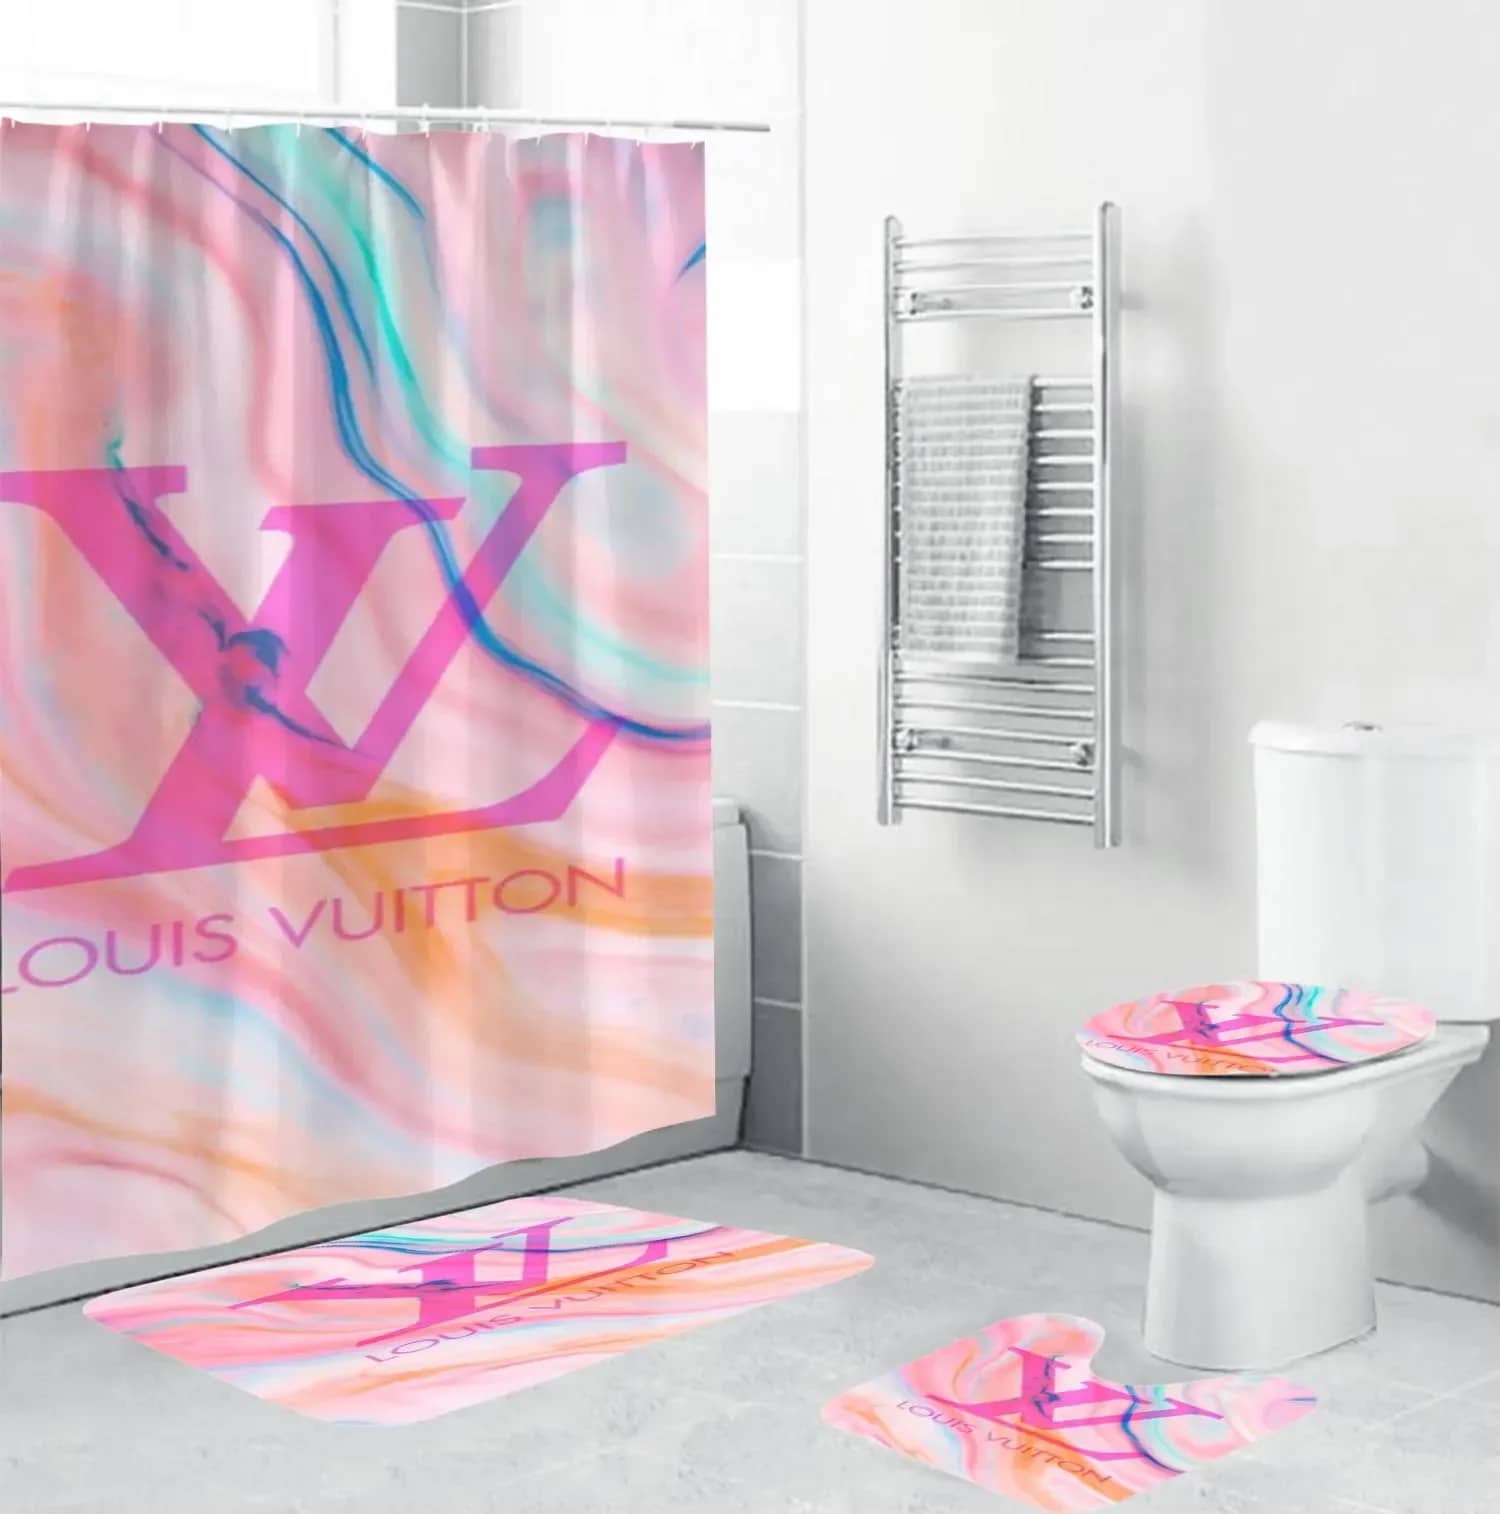 Louis Vuitton Logo Colorful Limited Luxury Brand Bathroom Sets